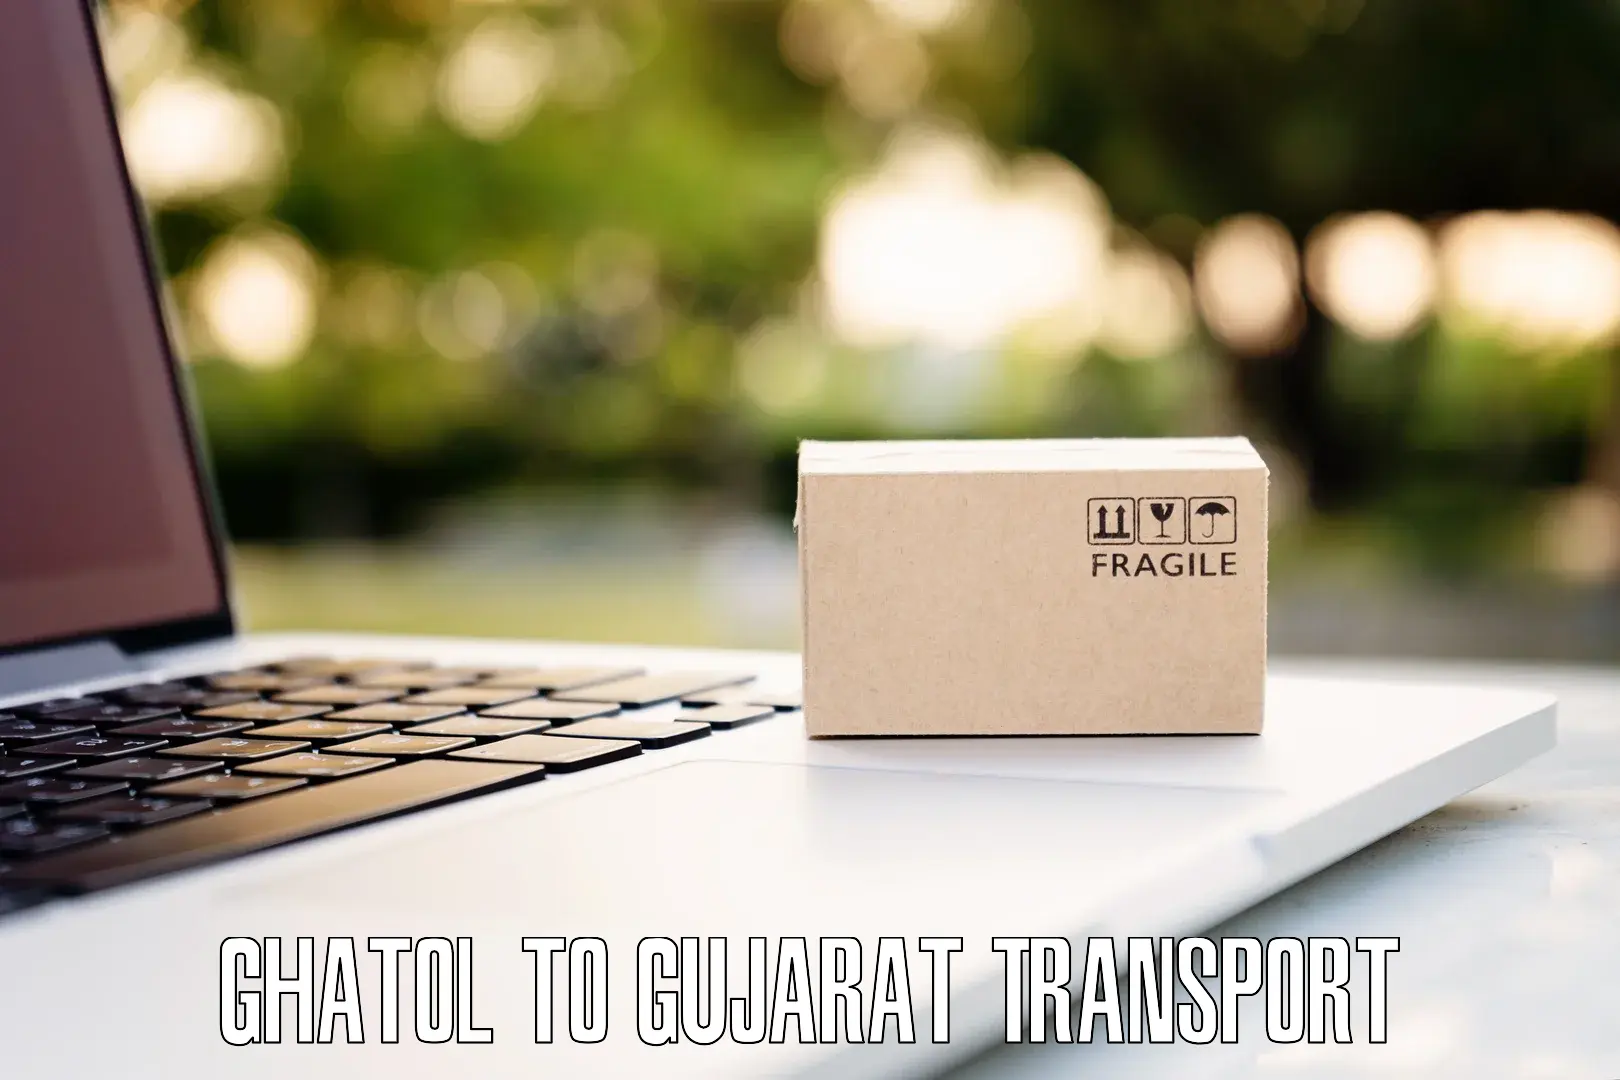 Commercial transport service Ghatol to Mundra